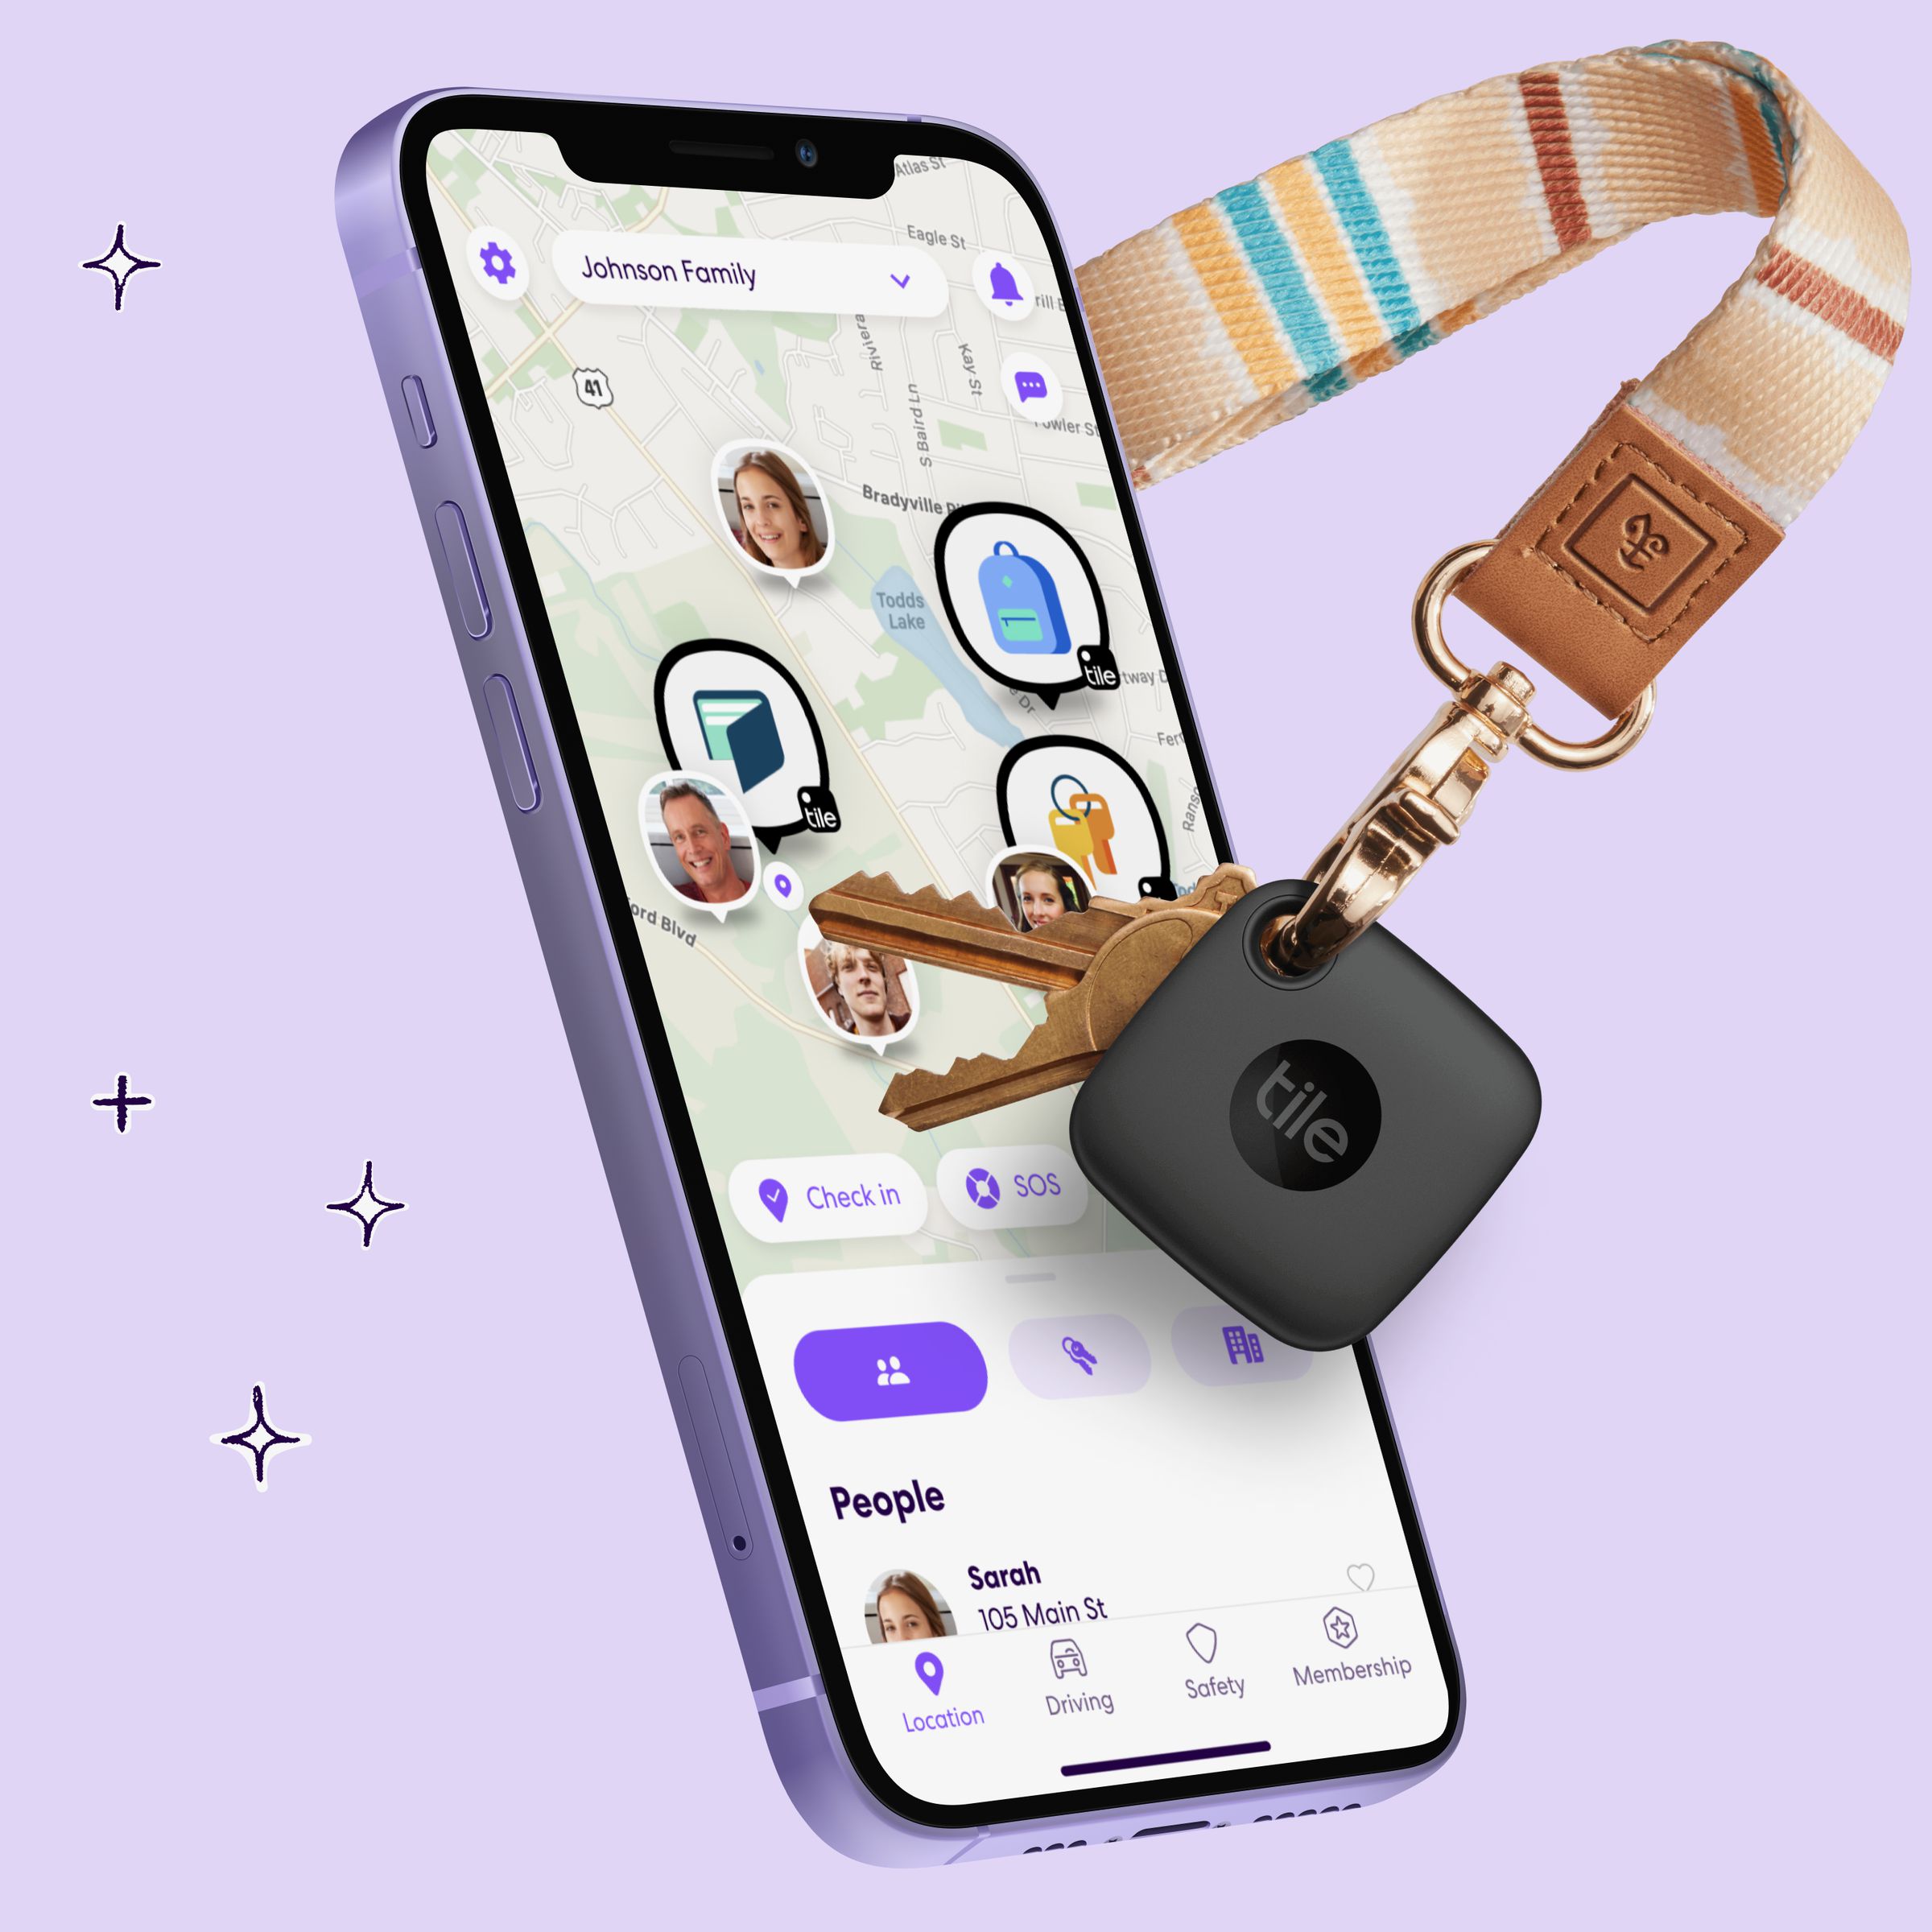 Life360 map view is running on a purple iPhone 12 and shows the locations of four people, a wallet, a bag, and another object. A keychain with two bronze keys are floating next to the iPhone with a pink lanyard, and attached to the ring is a square Tile tracker. Background is a solid light purple with pencil four-point star drawings.